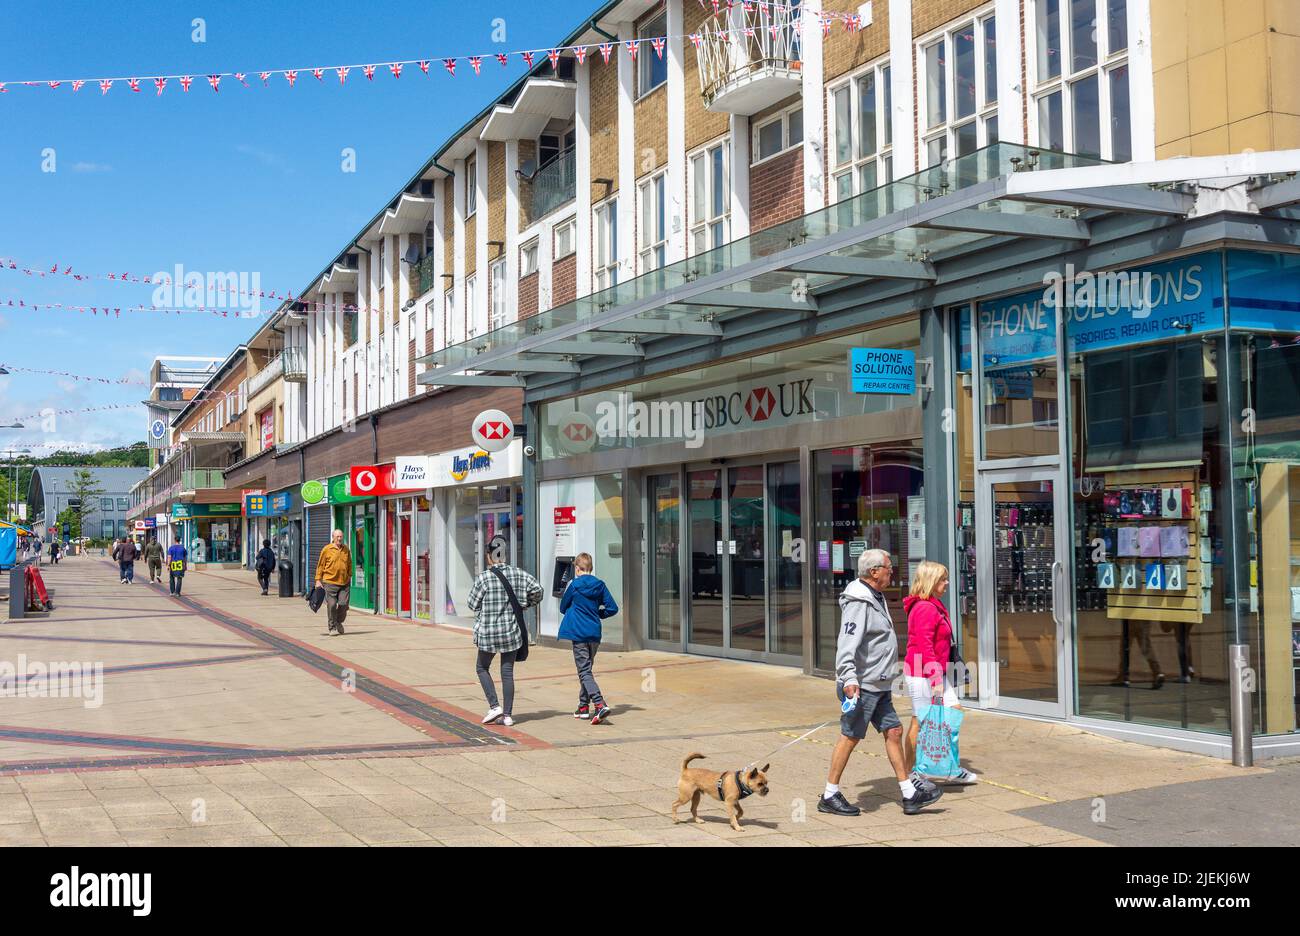 Corporation Street Shopping Center, George Street, Corby, Northamptonshire, Inghilterra, Regno Unito Foto Stock